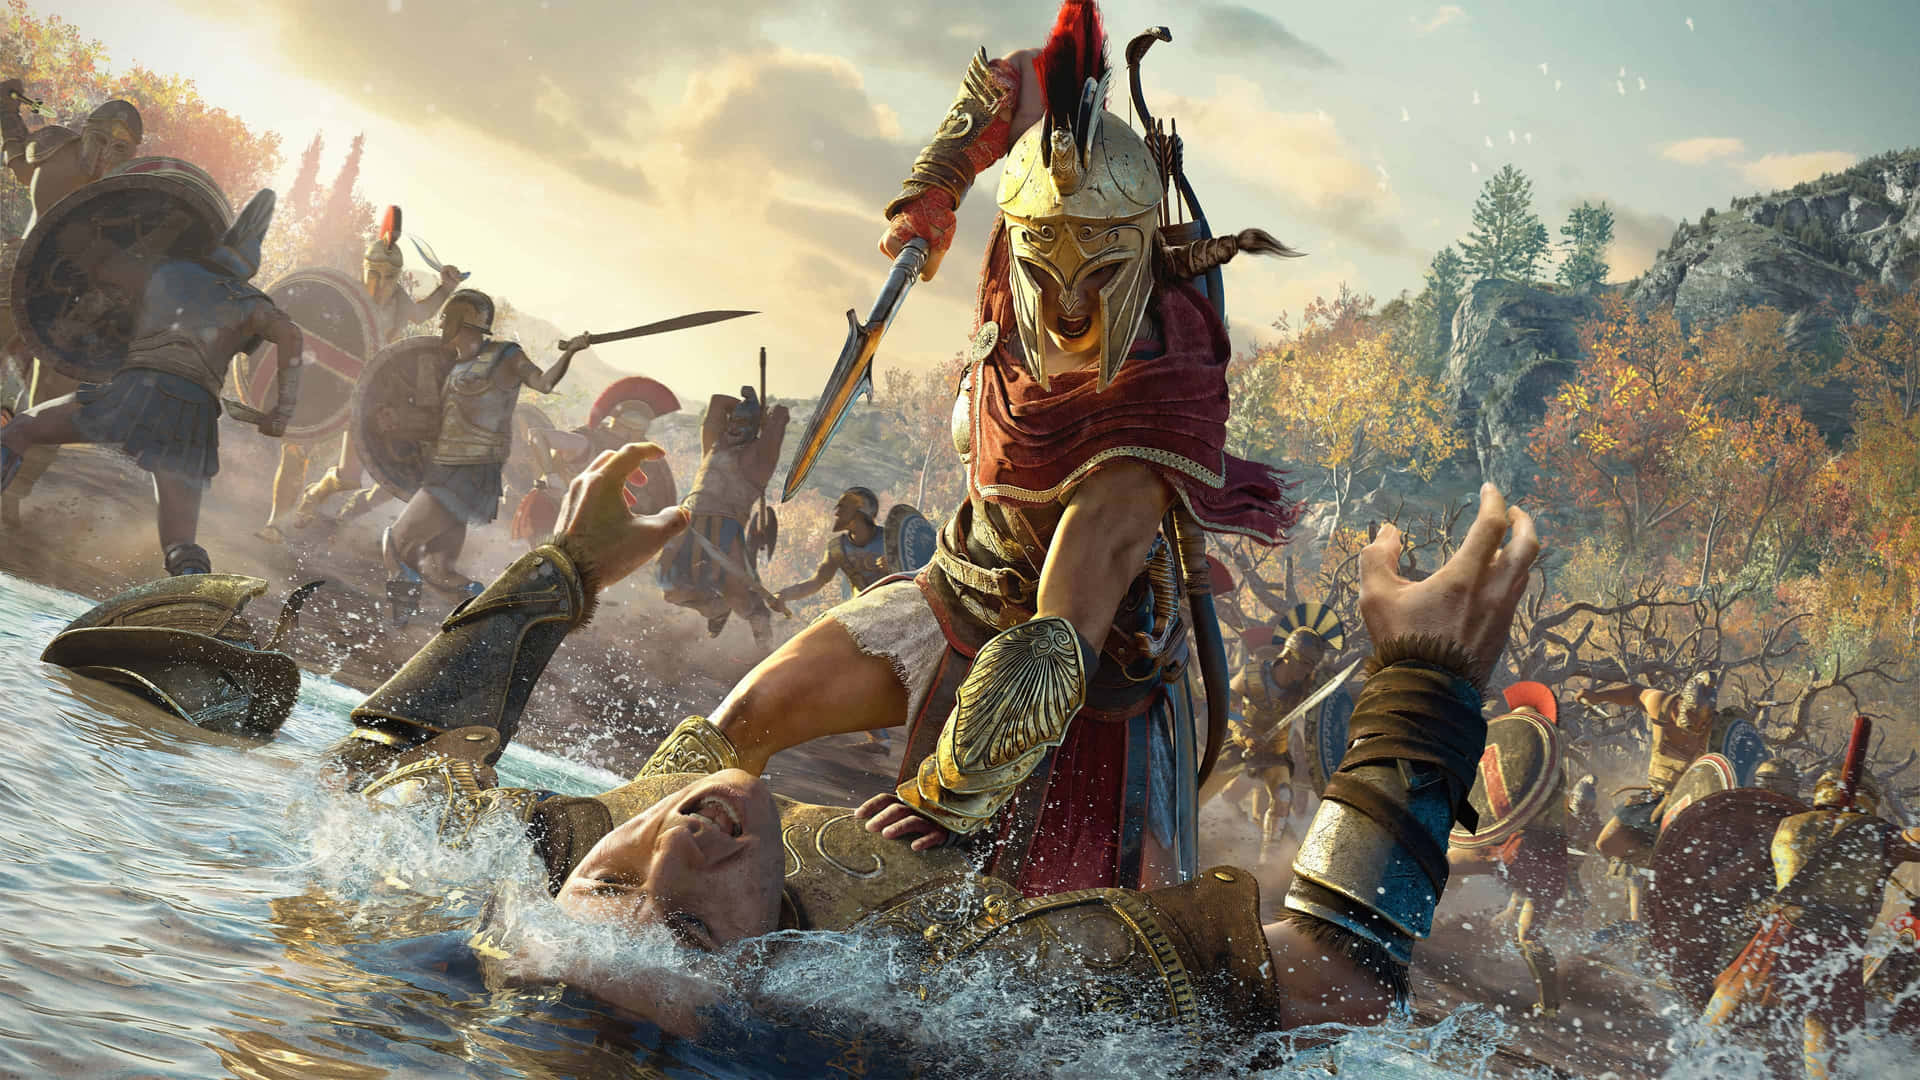 Get into the action with 4K Assassin's Creed Odyssey